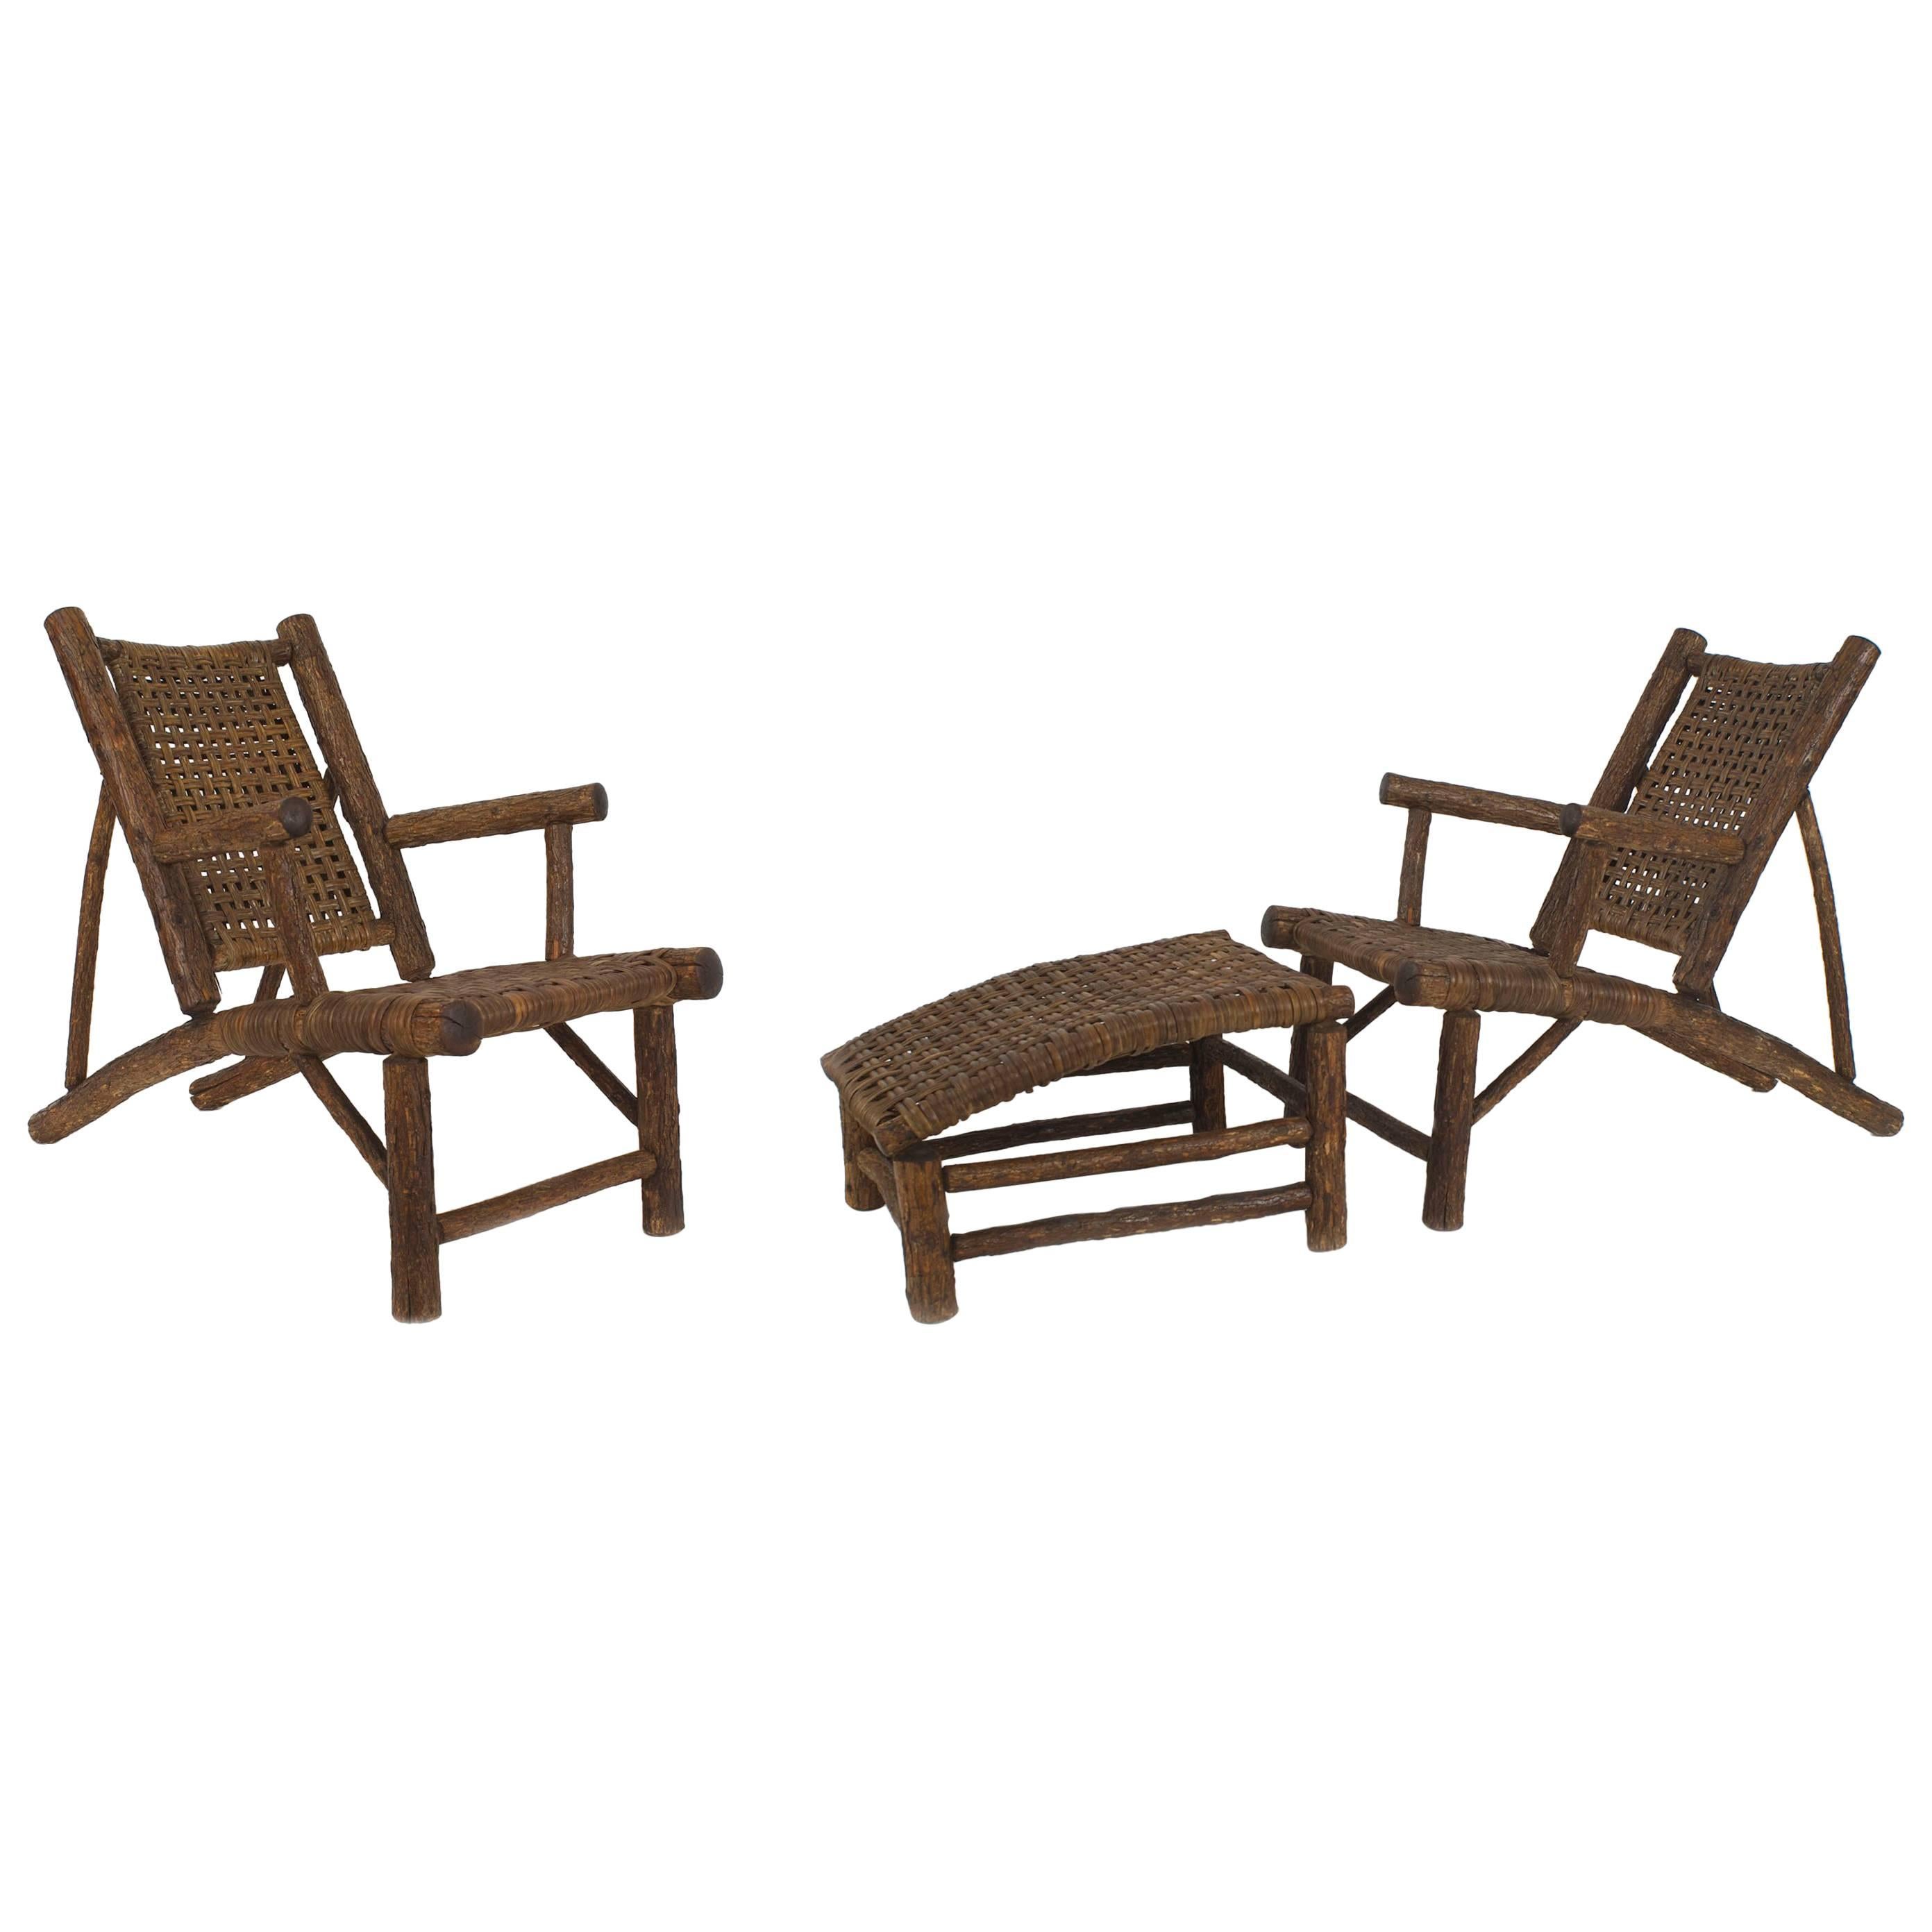 Pair of Old Hickory Wooden Low Armchairs